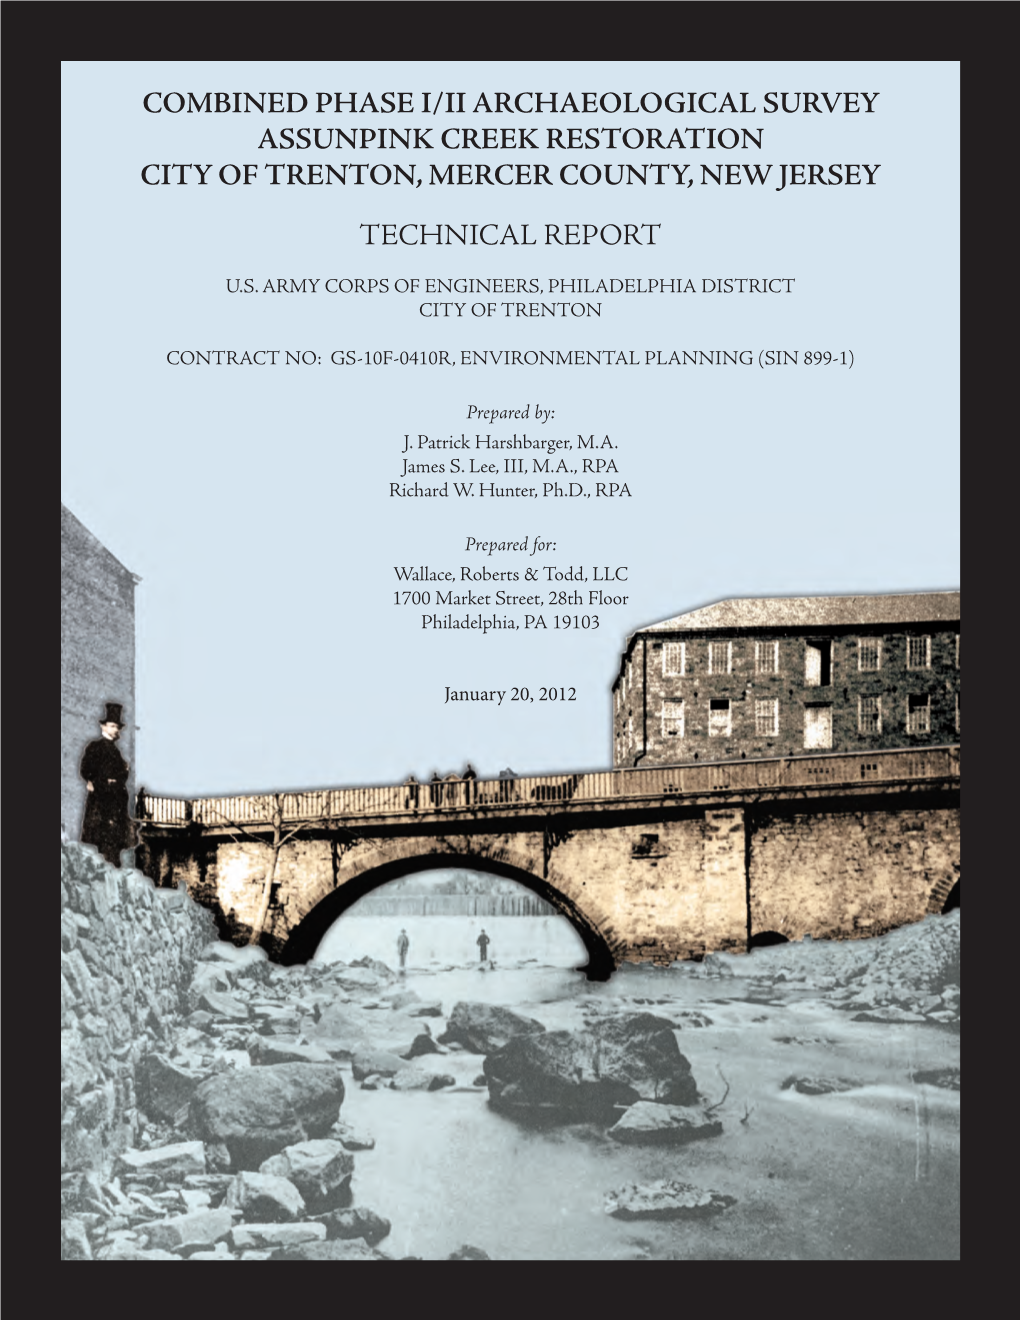 Combined Phase I/Ii Archaeological Survey Assunpink Creek Restoration City of Trenton, Mercer County, New Jersey Technical Report